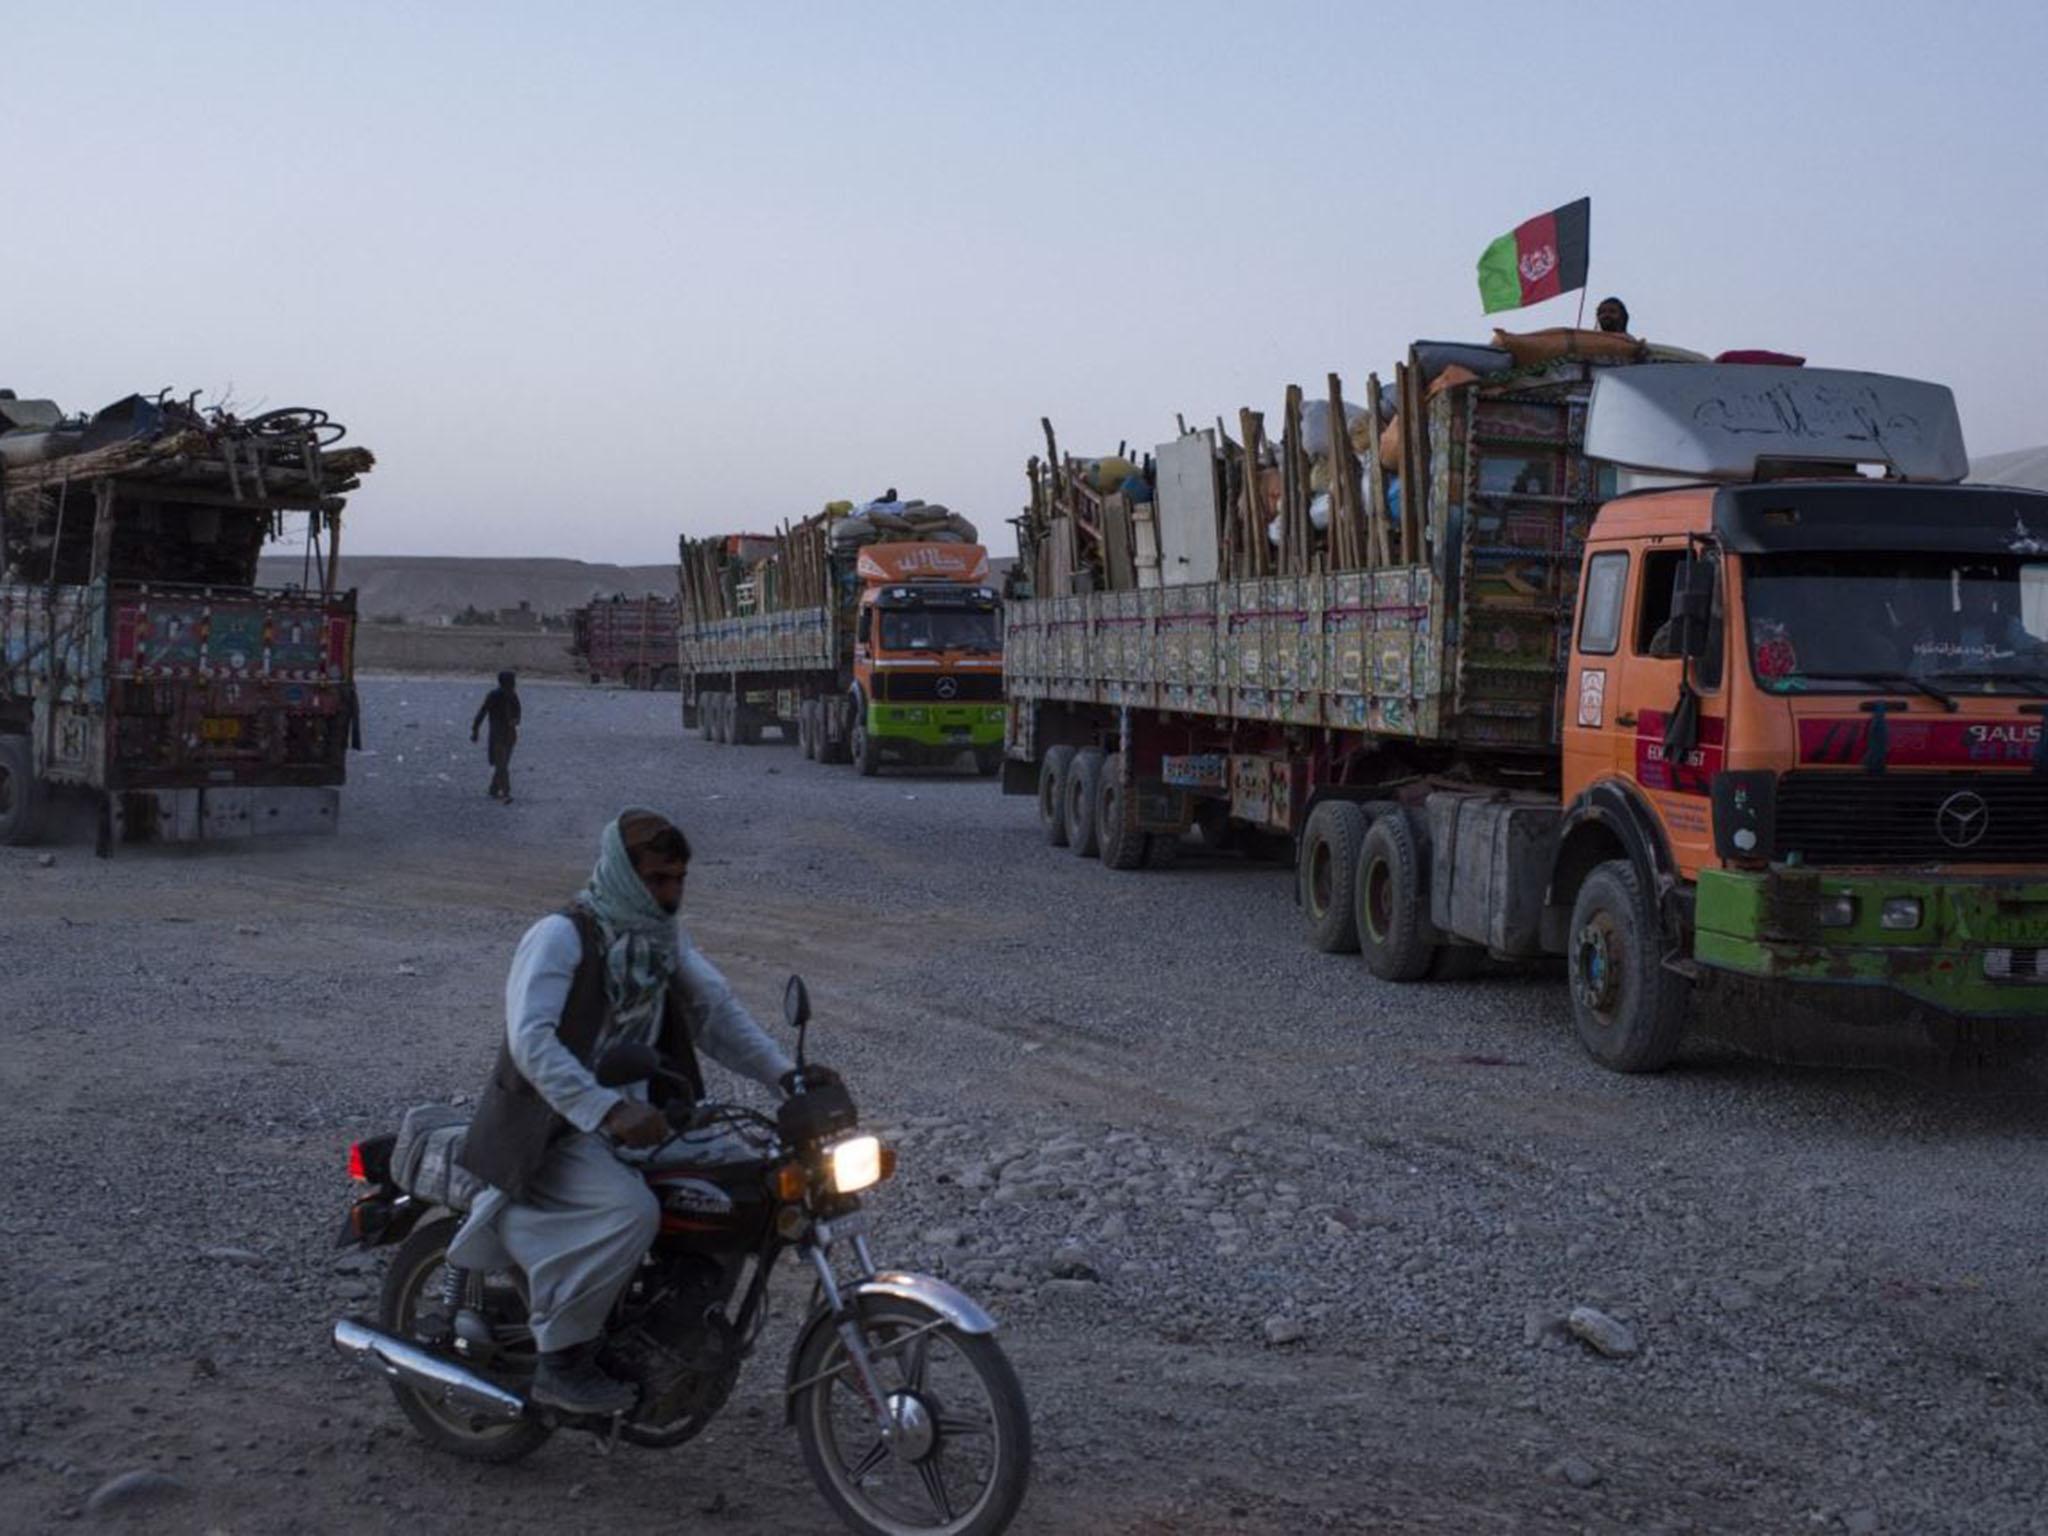 More Afghan refugees arrive from Pakistan